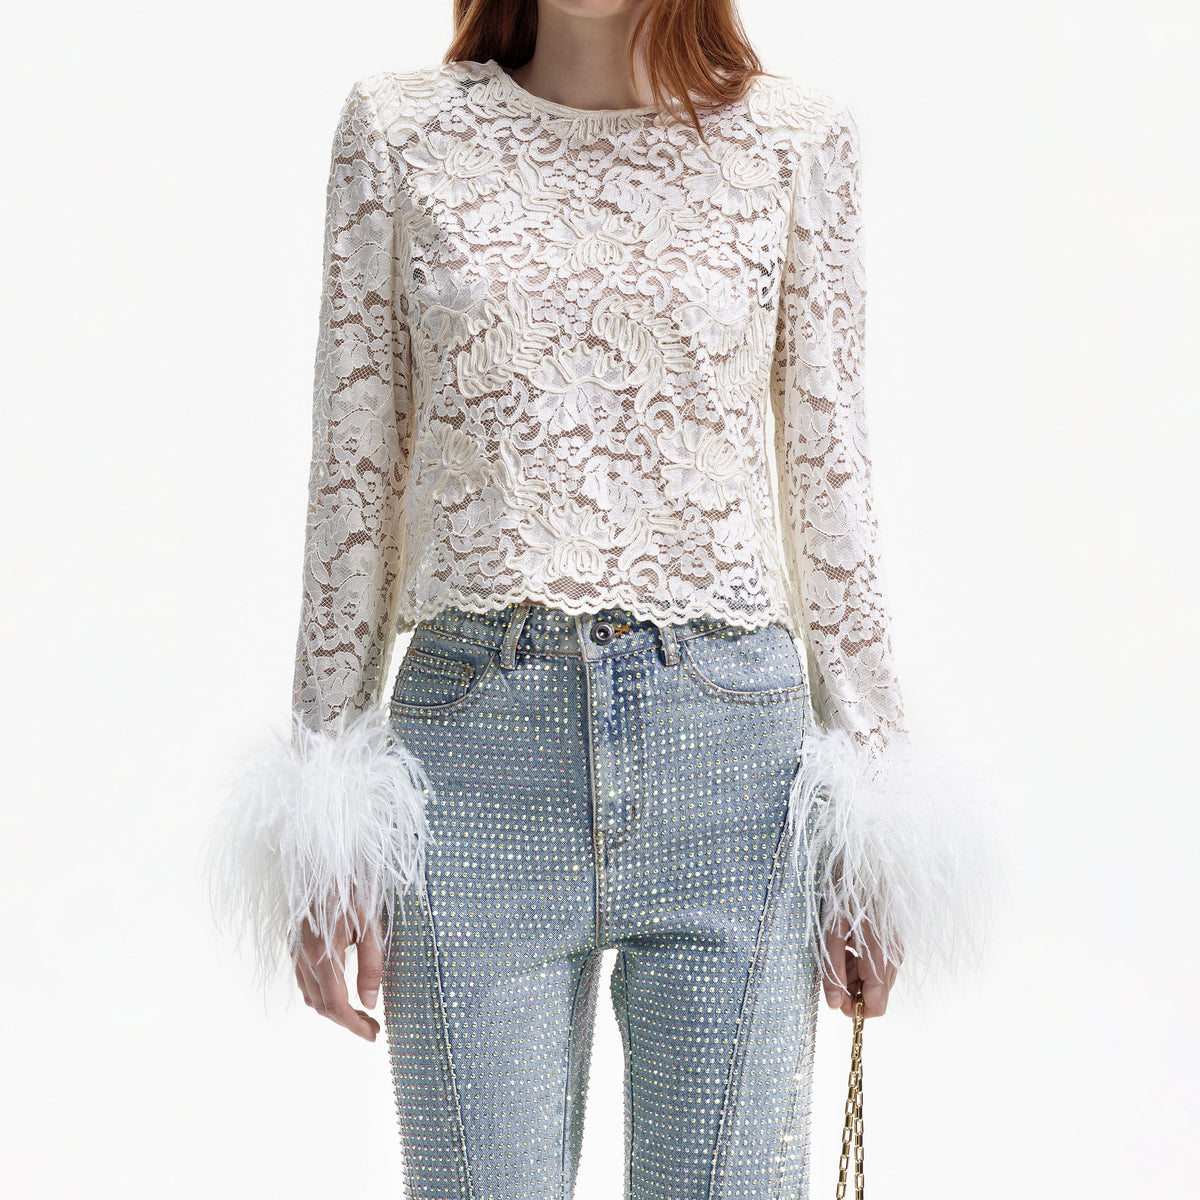 Cream cord lace long sleeved top with feather sleeves